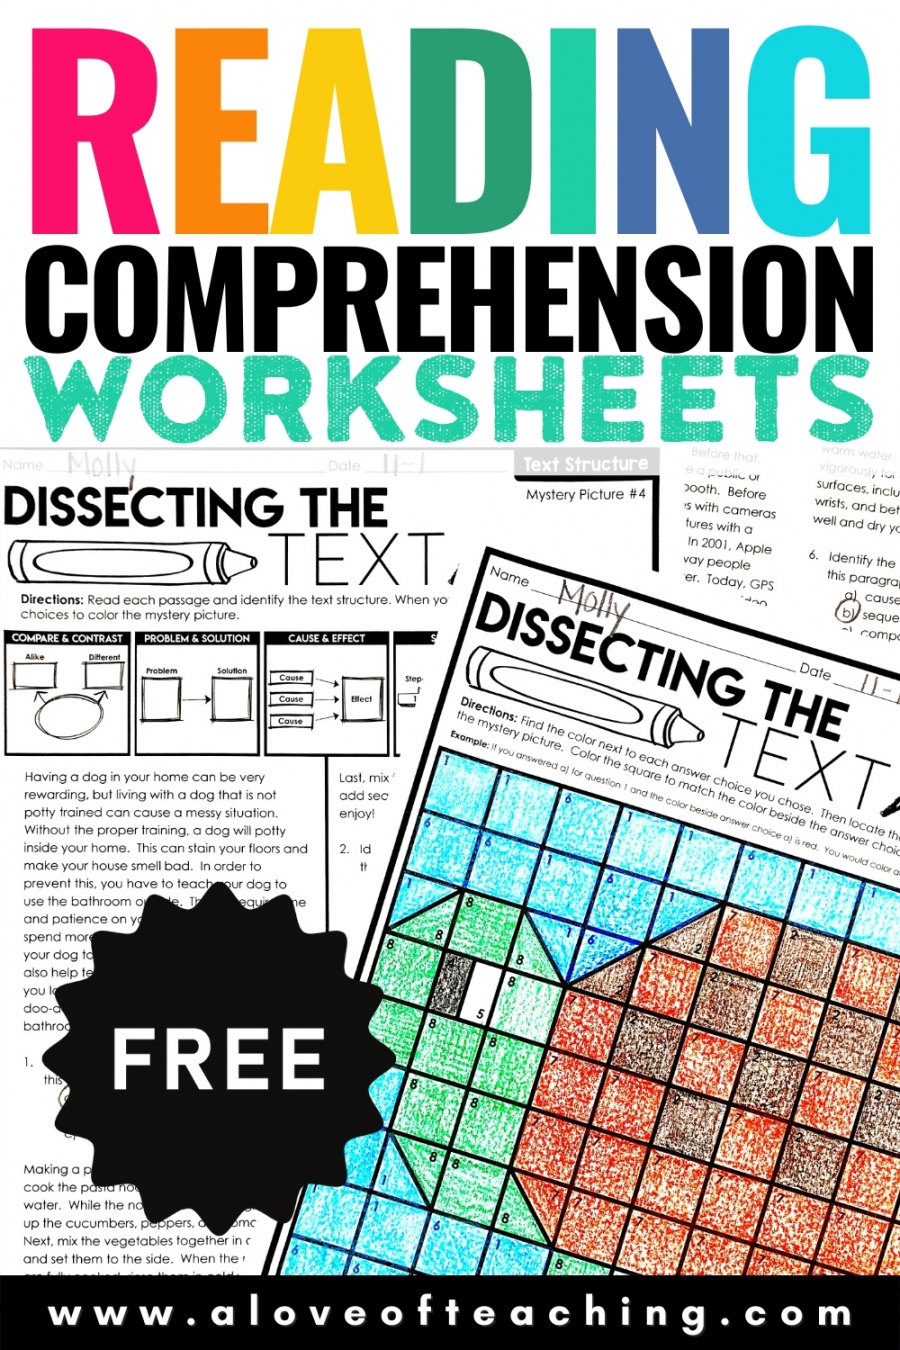 FREE Reading Comprehension Practice Worksheets - A Love of